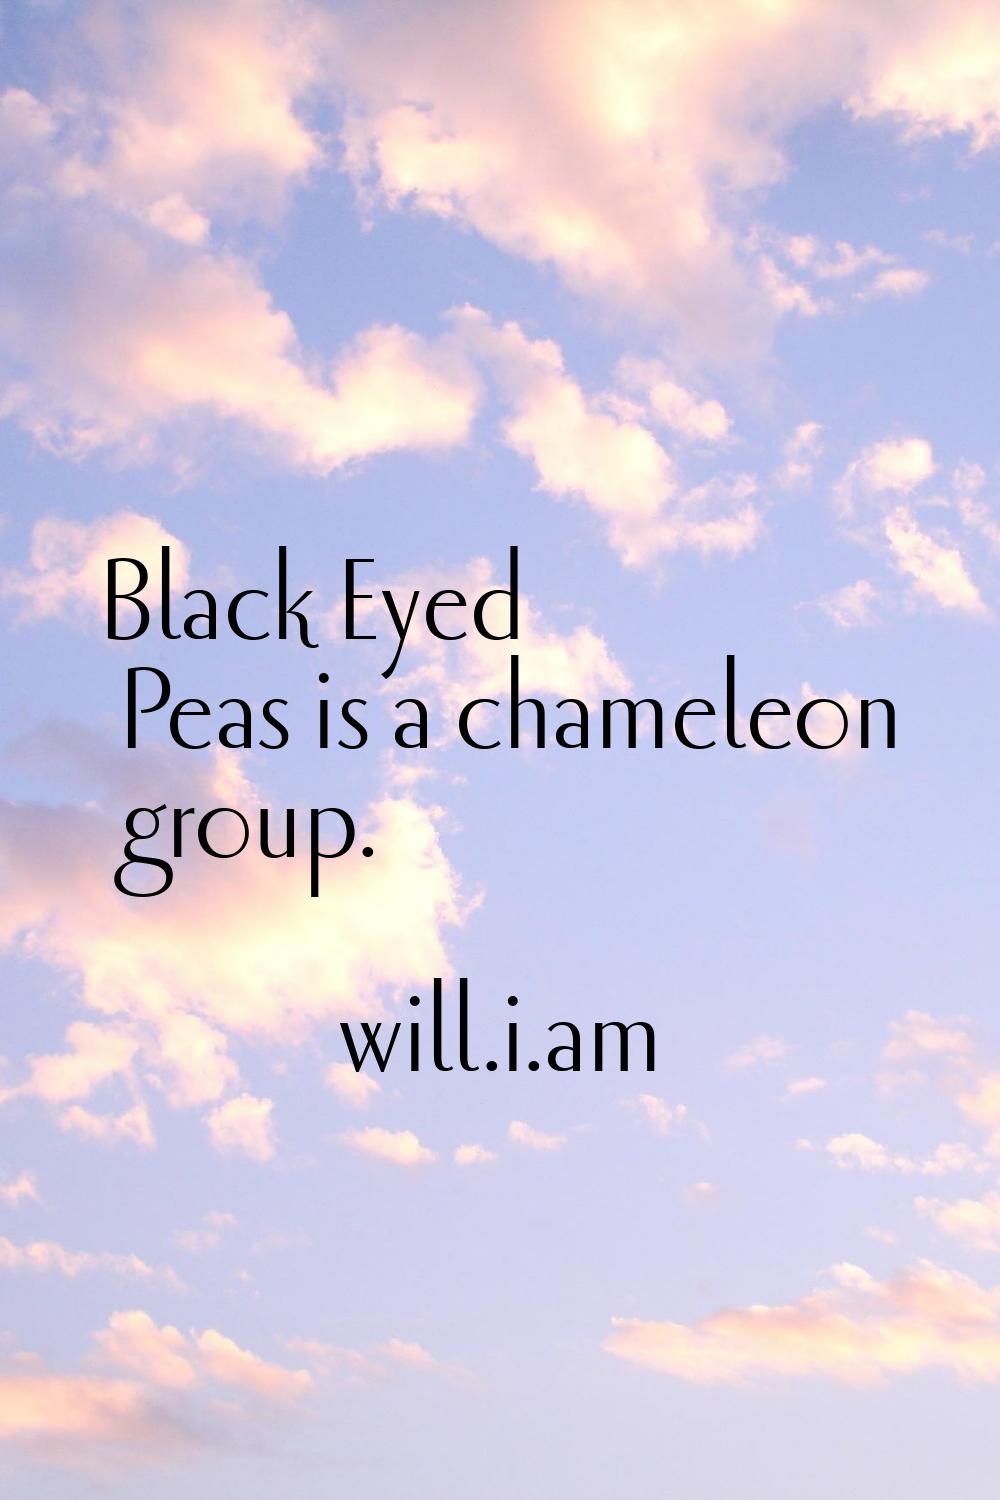 Black Eyed Peas is a chameleon group.